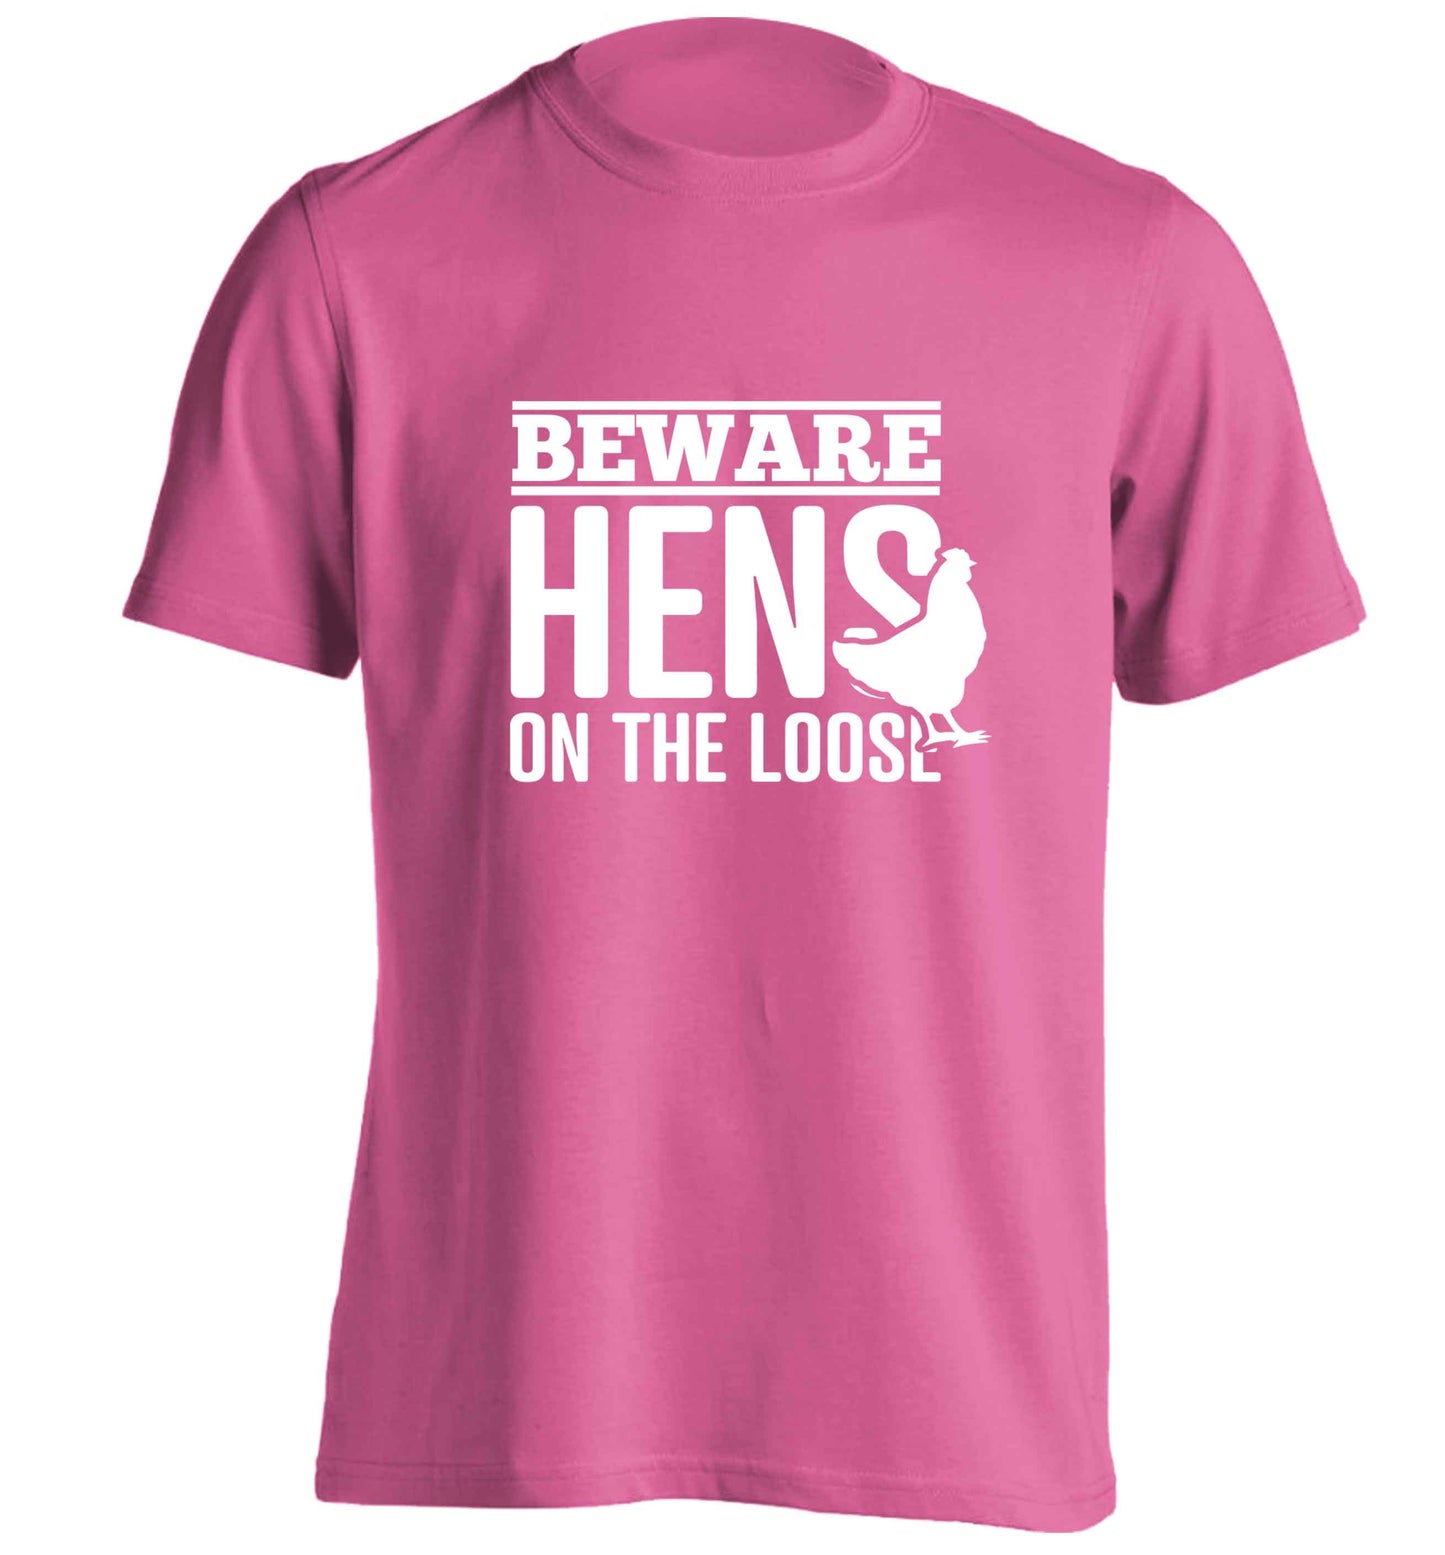 Beware hens on the loose adults unisex pink Tshirt 2XL